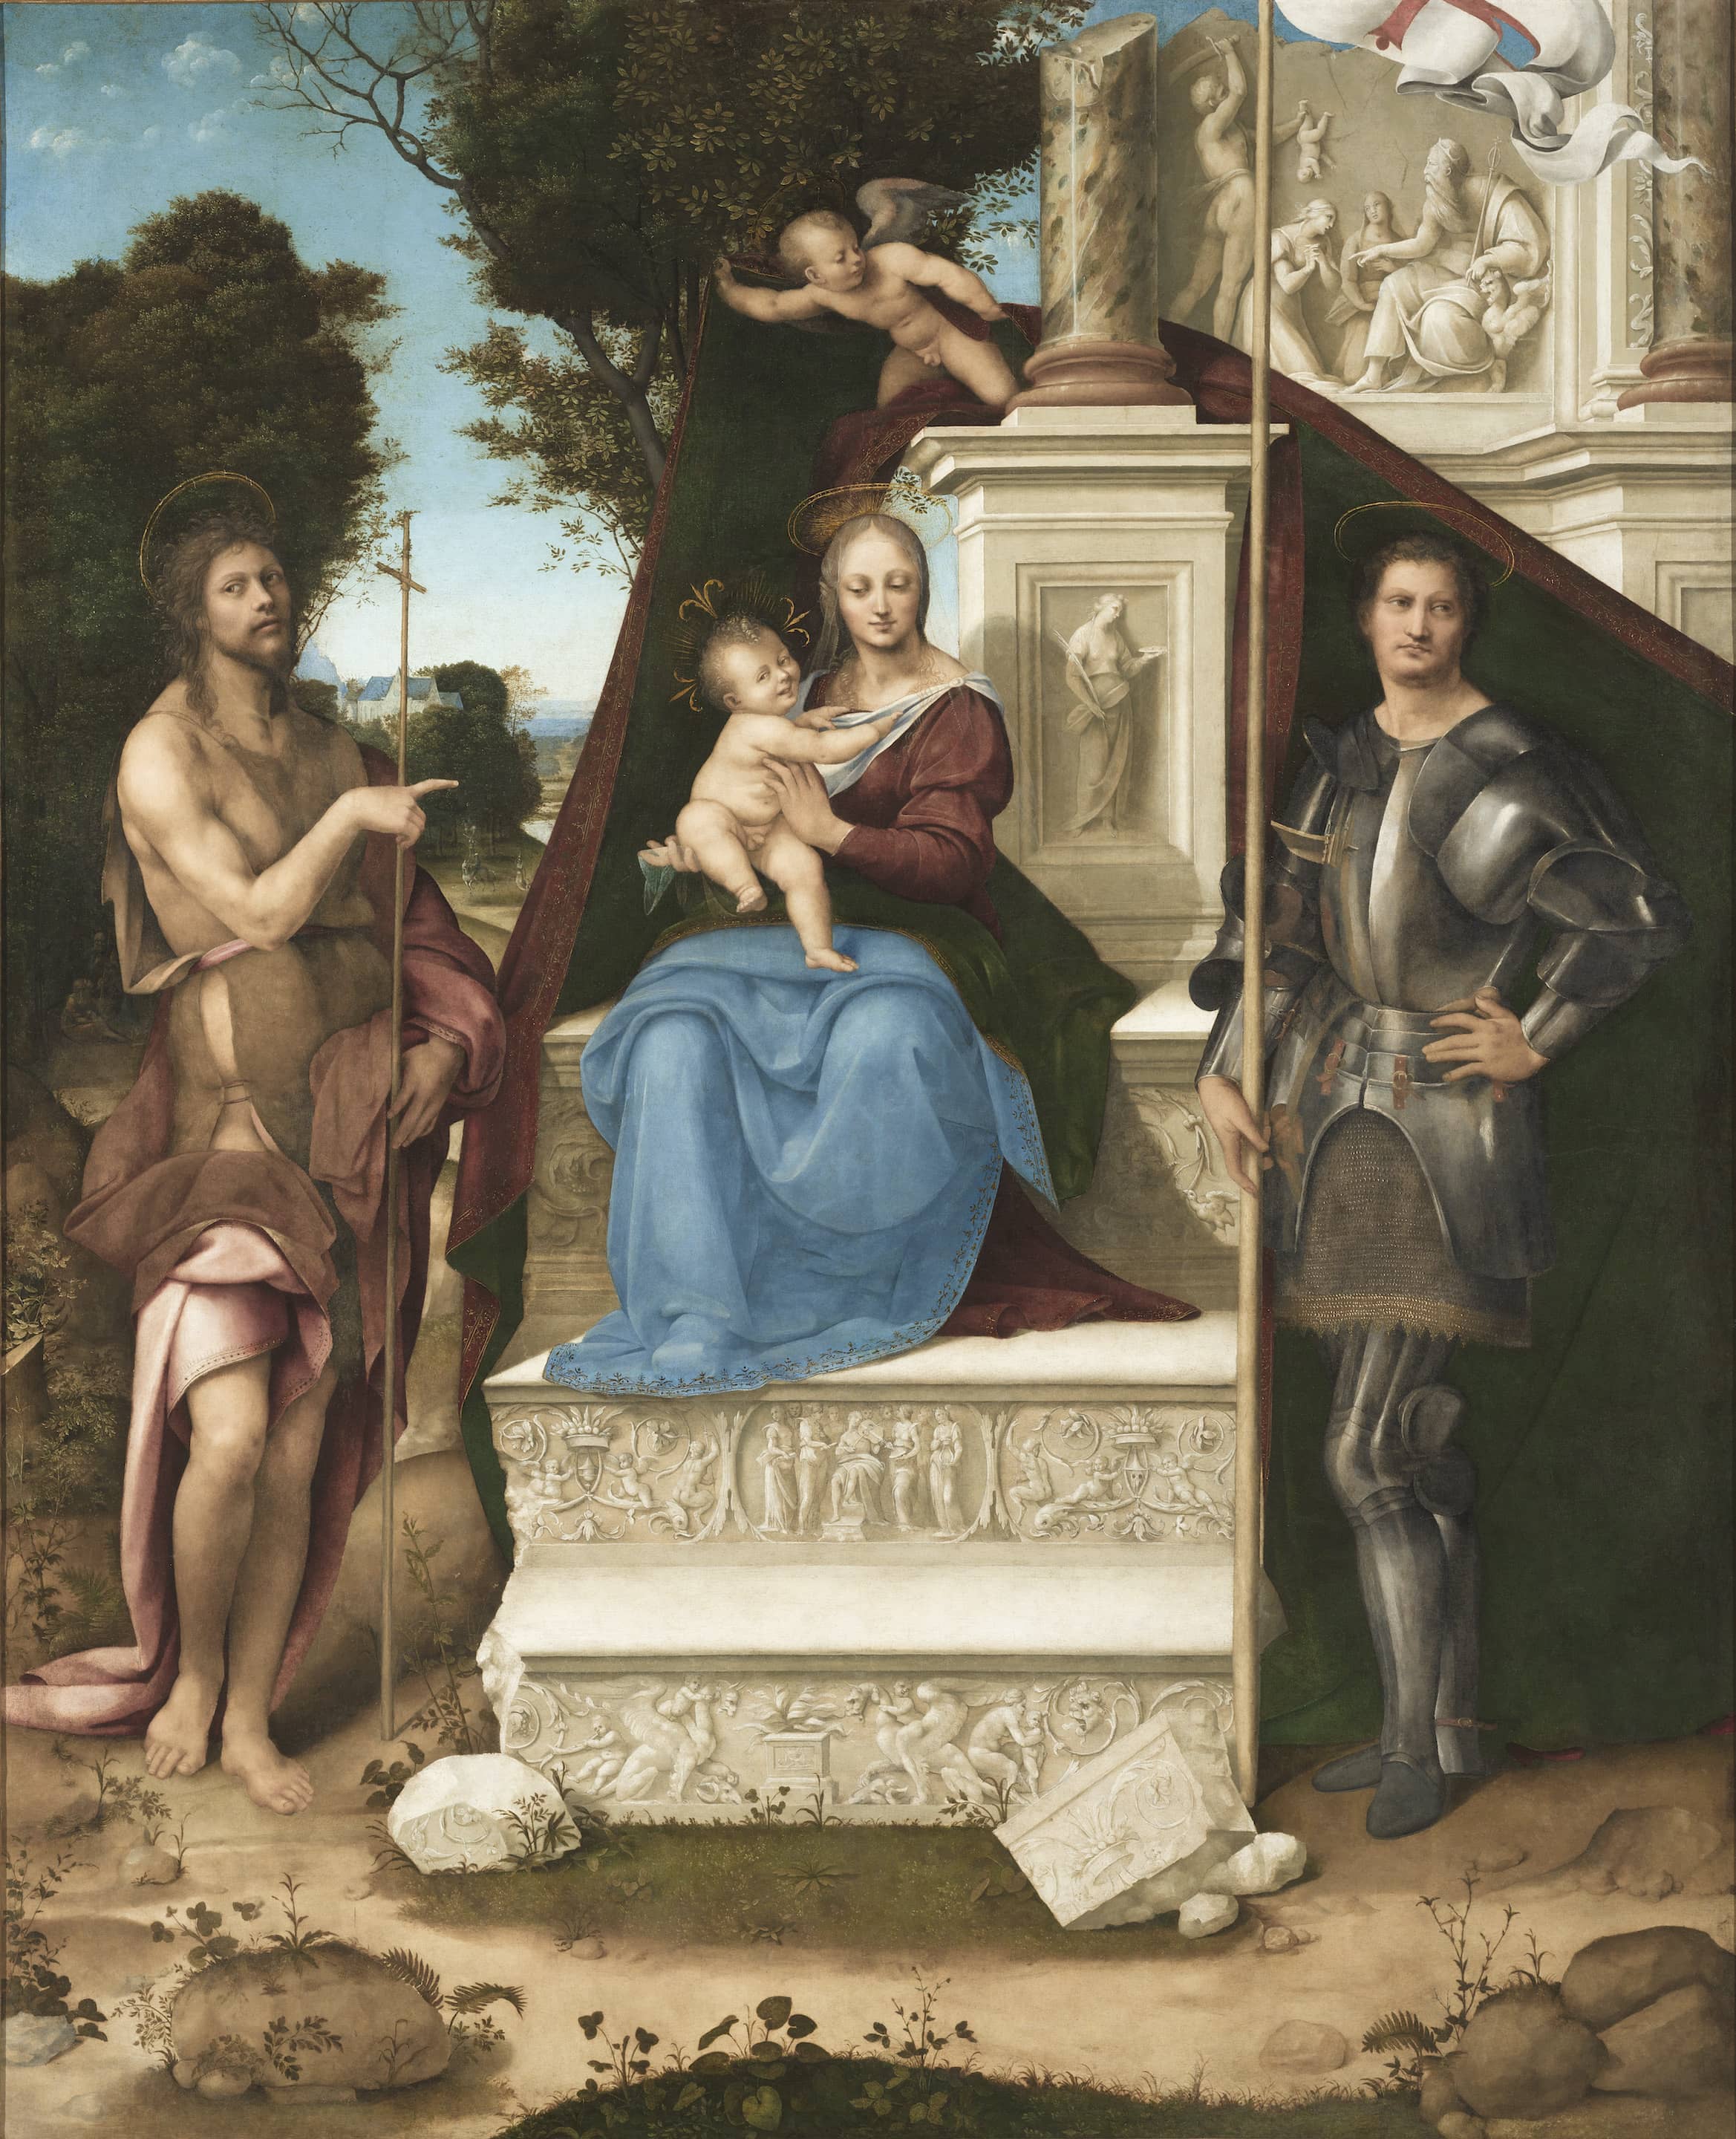 Madonna and Child sitting on a throne, flanked on the right by Saint George in armor carring a flag and Saint John the Baptist holding a cross.